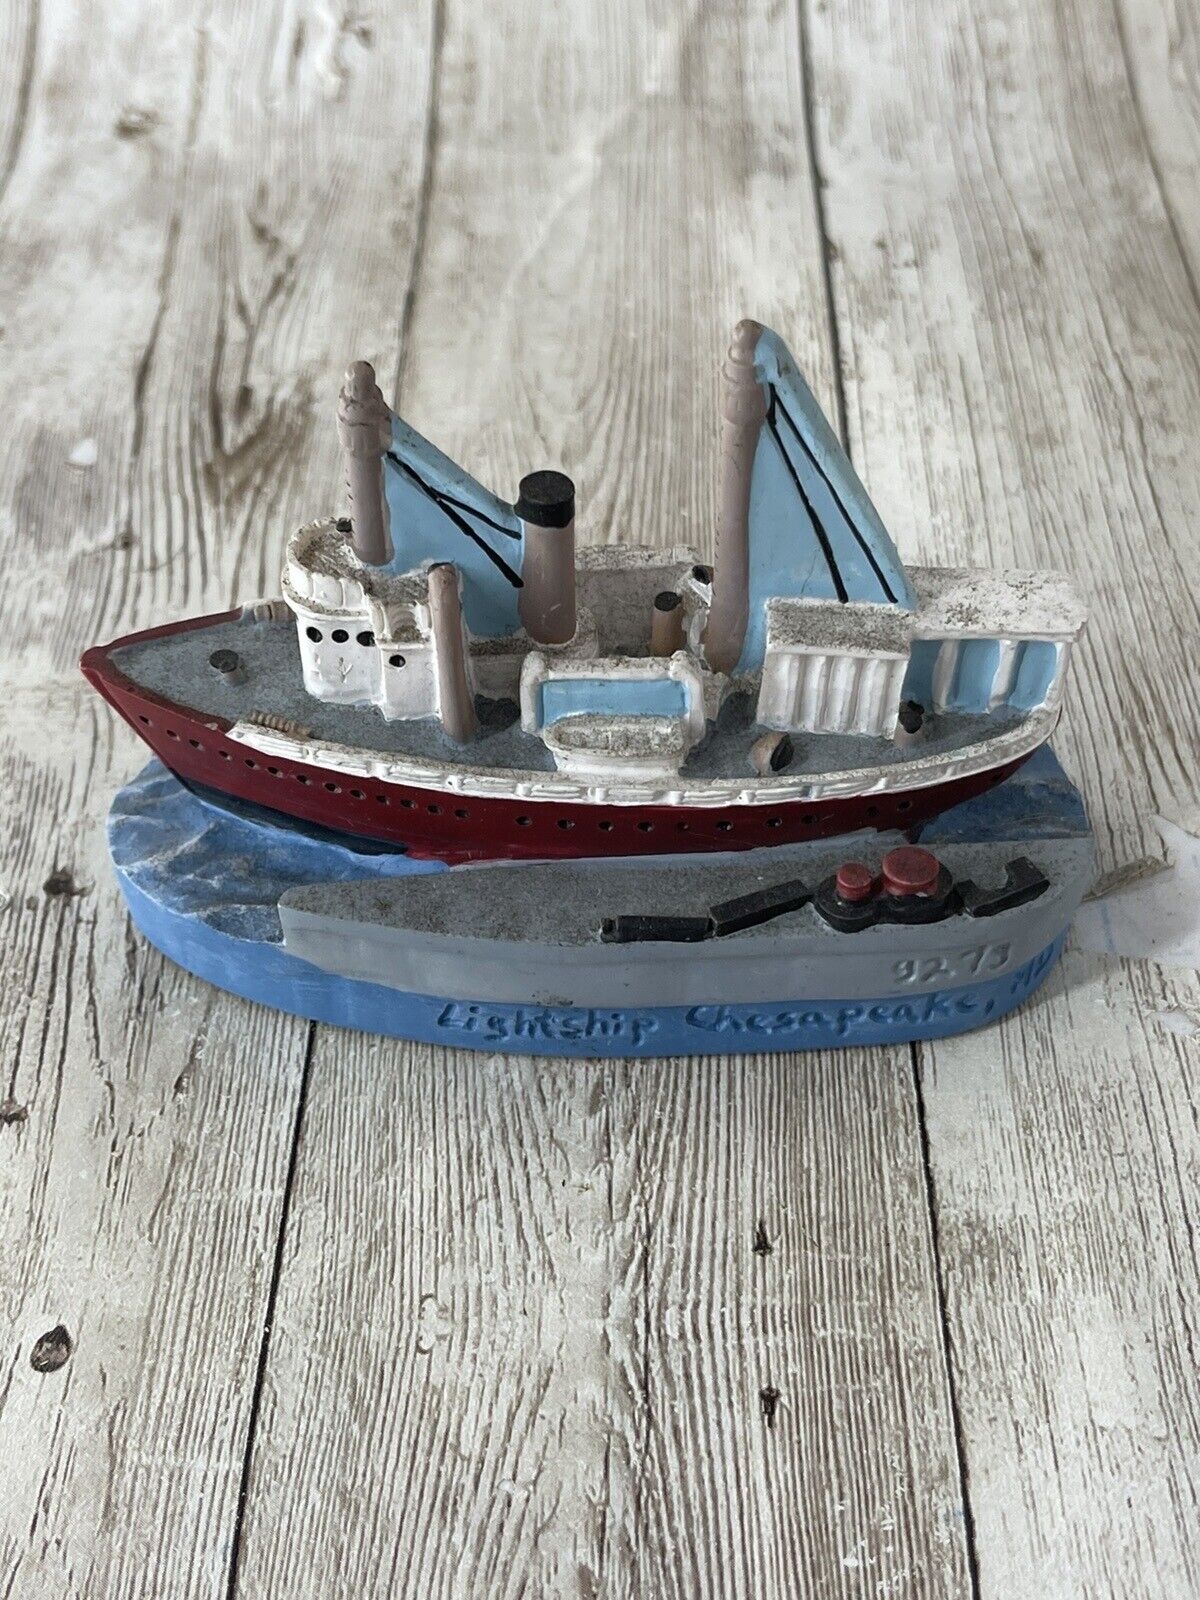 Lightship Chesapeake Maryland by Spoontiques Figurine Boat Ship Sculpture 9279